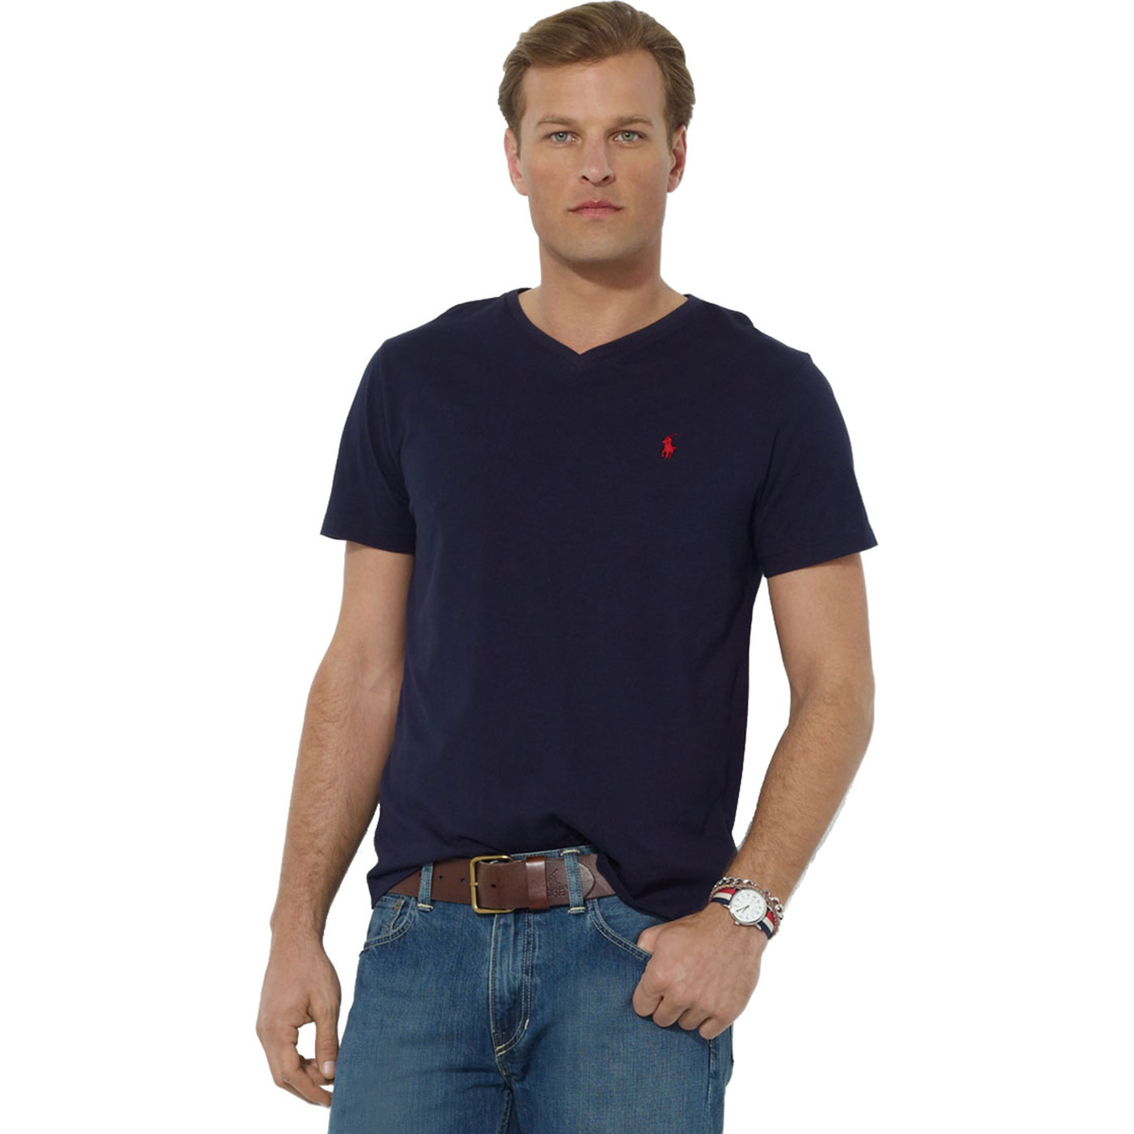 Polo Ralph Lauren Jersey V Neck Tee | Shirts | Clothing & Accessories ...